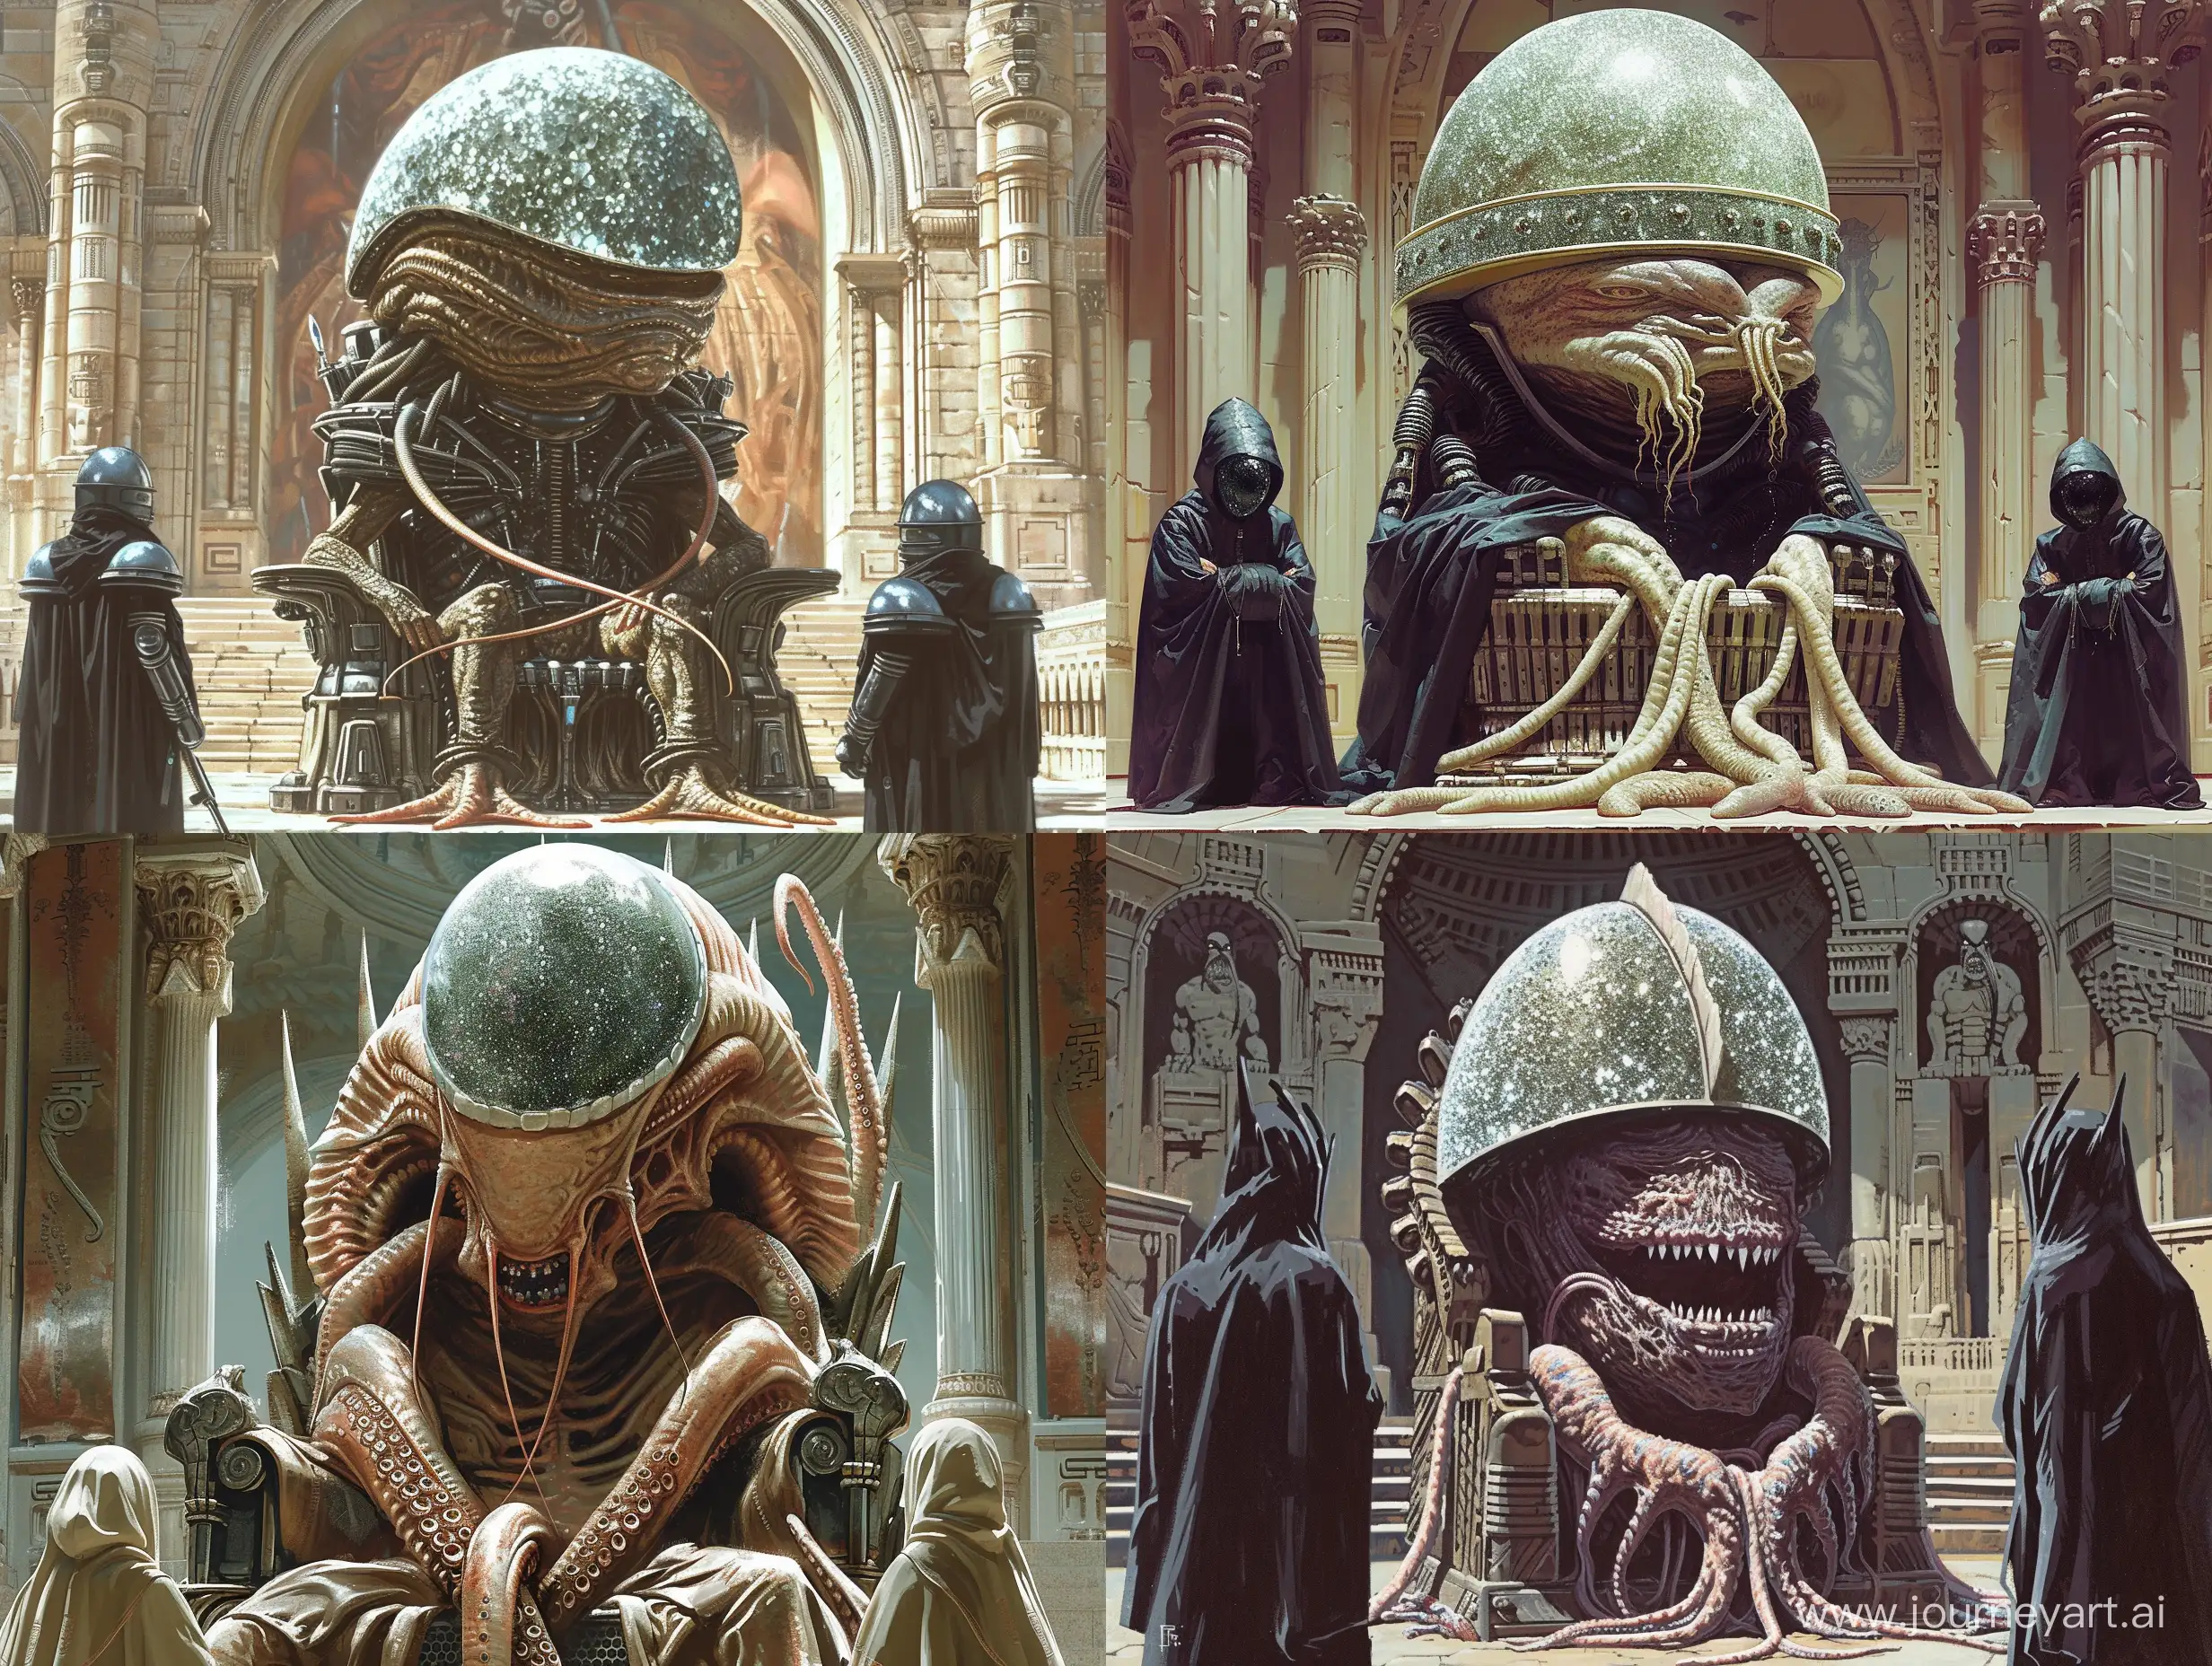 SciFi-Throne-Room-Aquatic-Alien-Ruler-and-Guards-by-HR-Giger